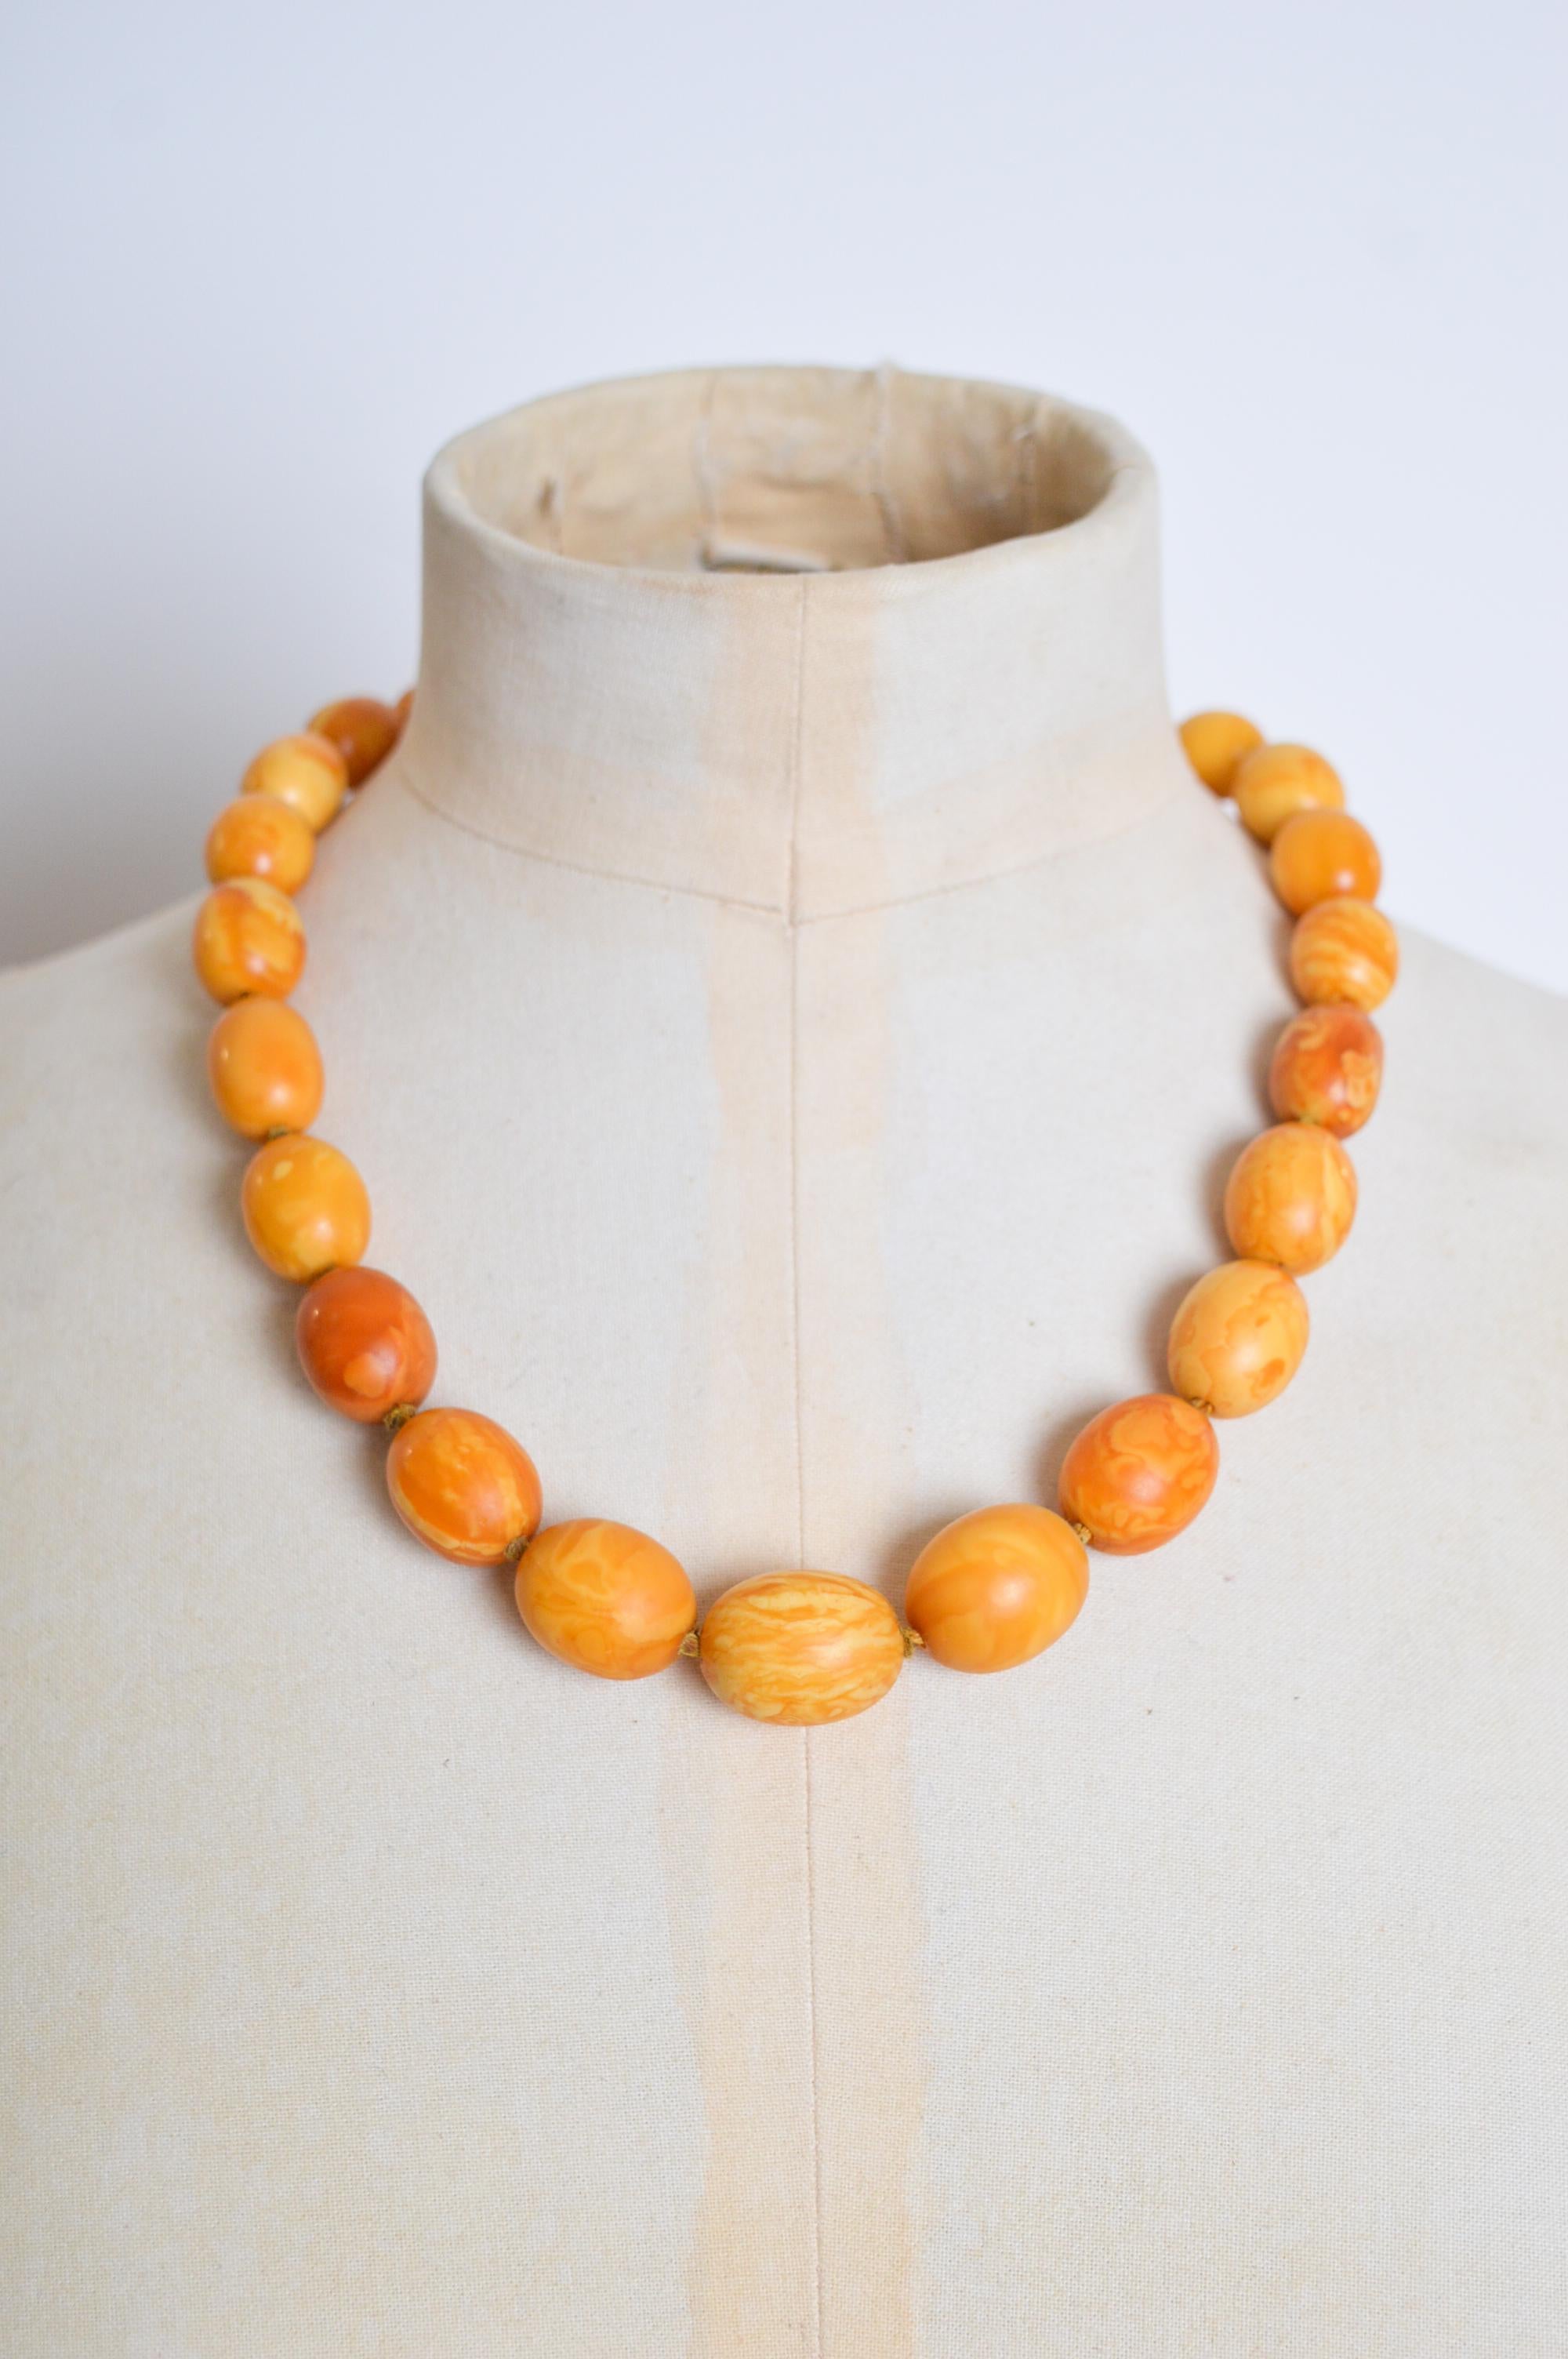 A Truly exceptional Antique Amber Necklace, circa 1930.

Graduated olive shaped beads, crafted from beautiful butterscotch Amber, with a 9ct Gold clasp. 

Length; 50cm
Widest Bead; 22mm > Smallest Bead 14mm
Weight; 49.09g

If you have any questions